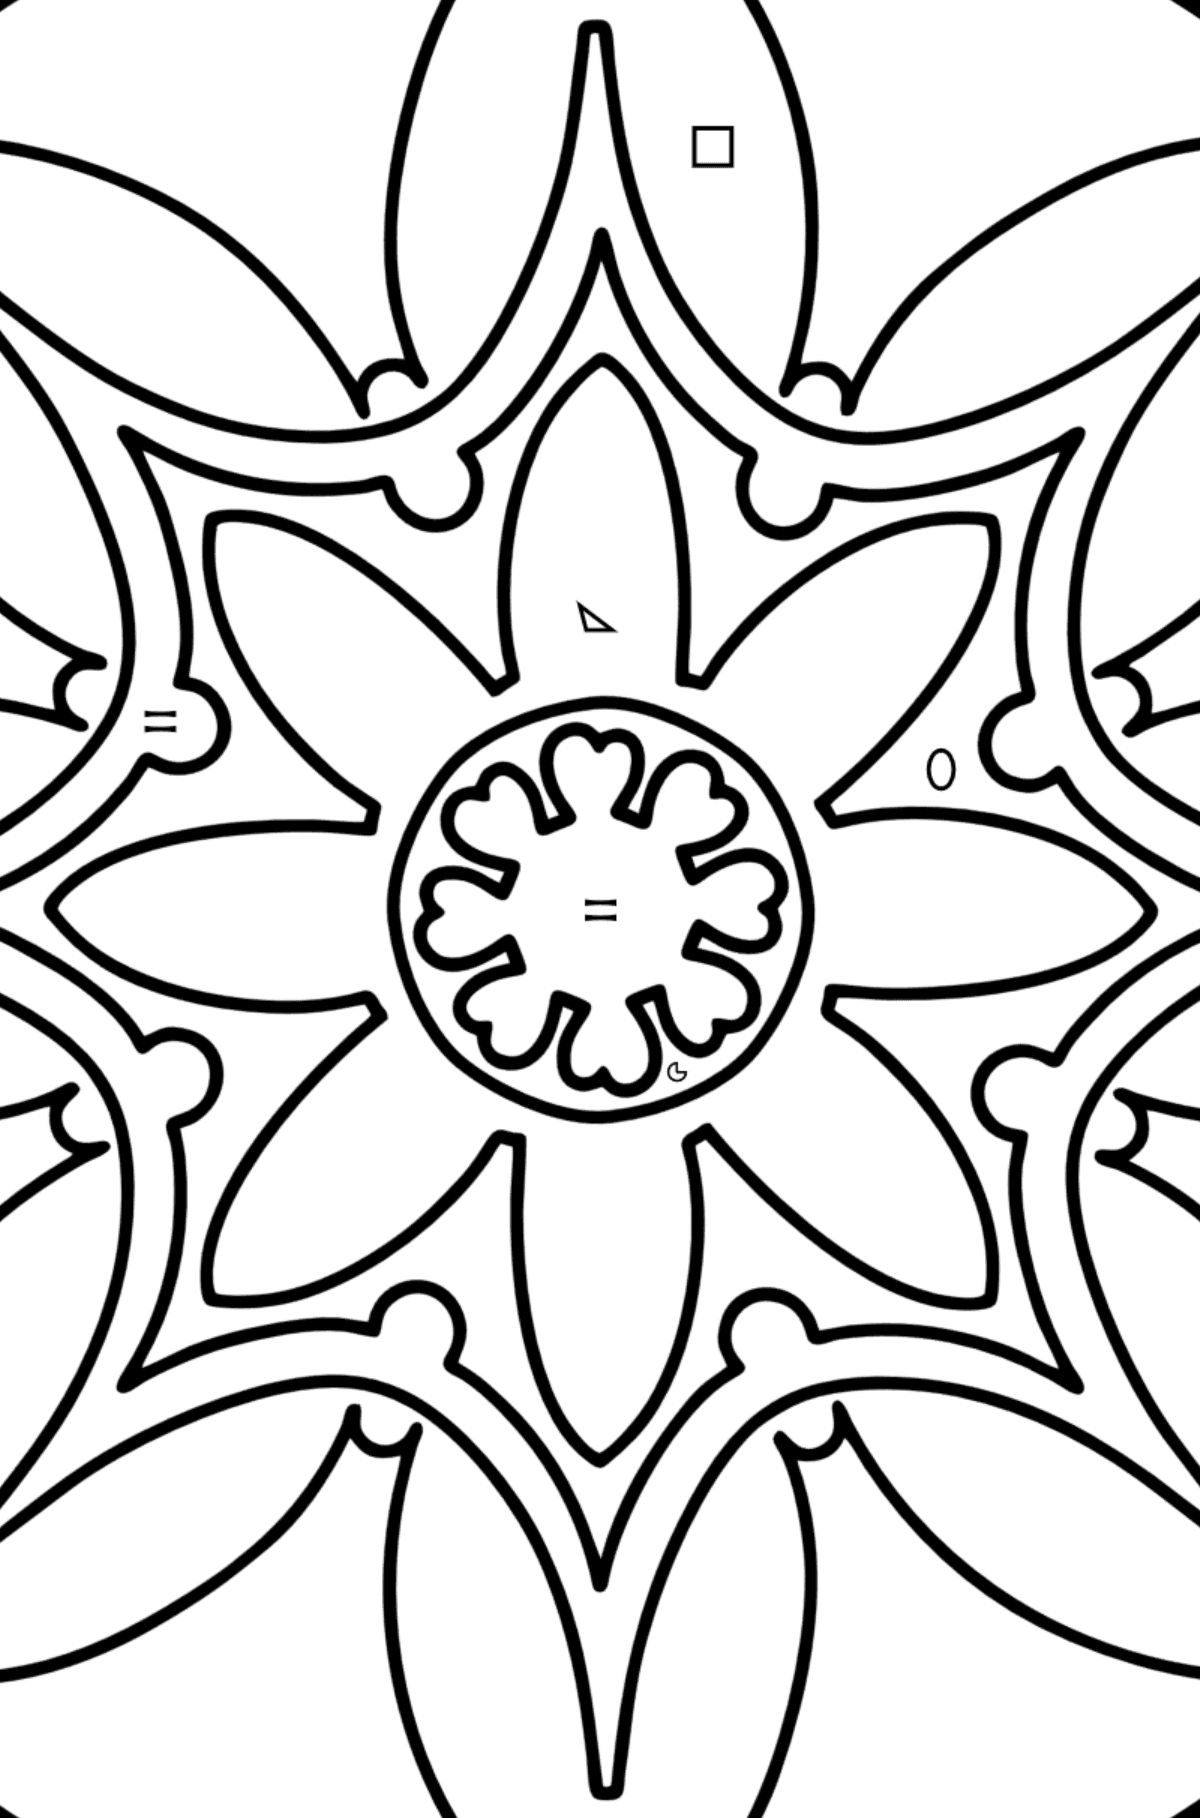 Mandala coloring page - 7 elements - Coloring by Symbols and Geometric Shapes for Kids